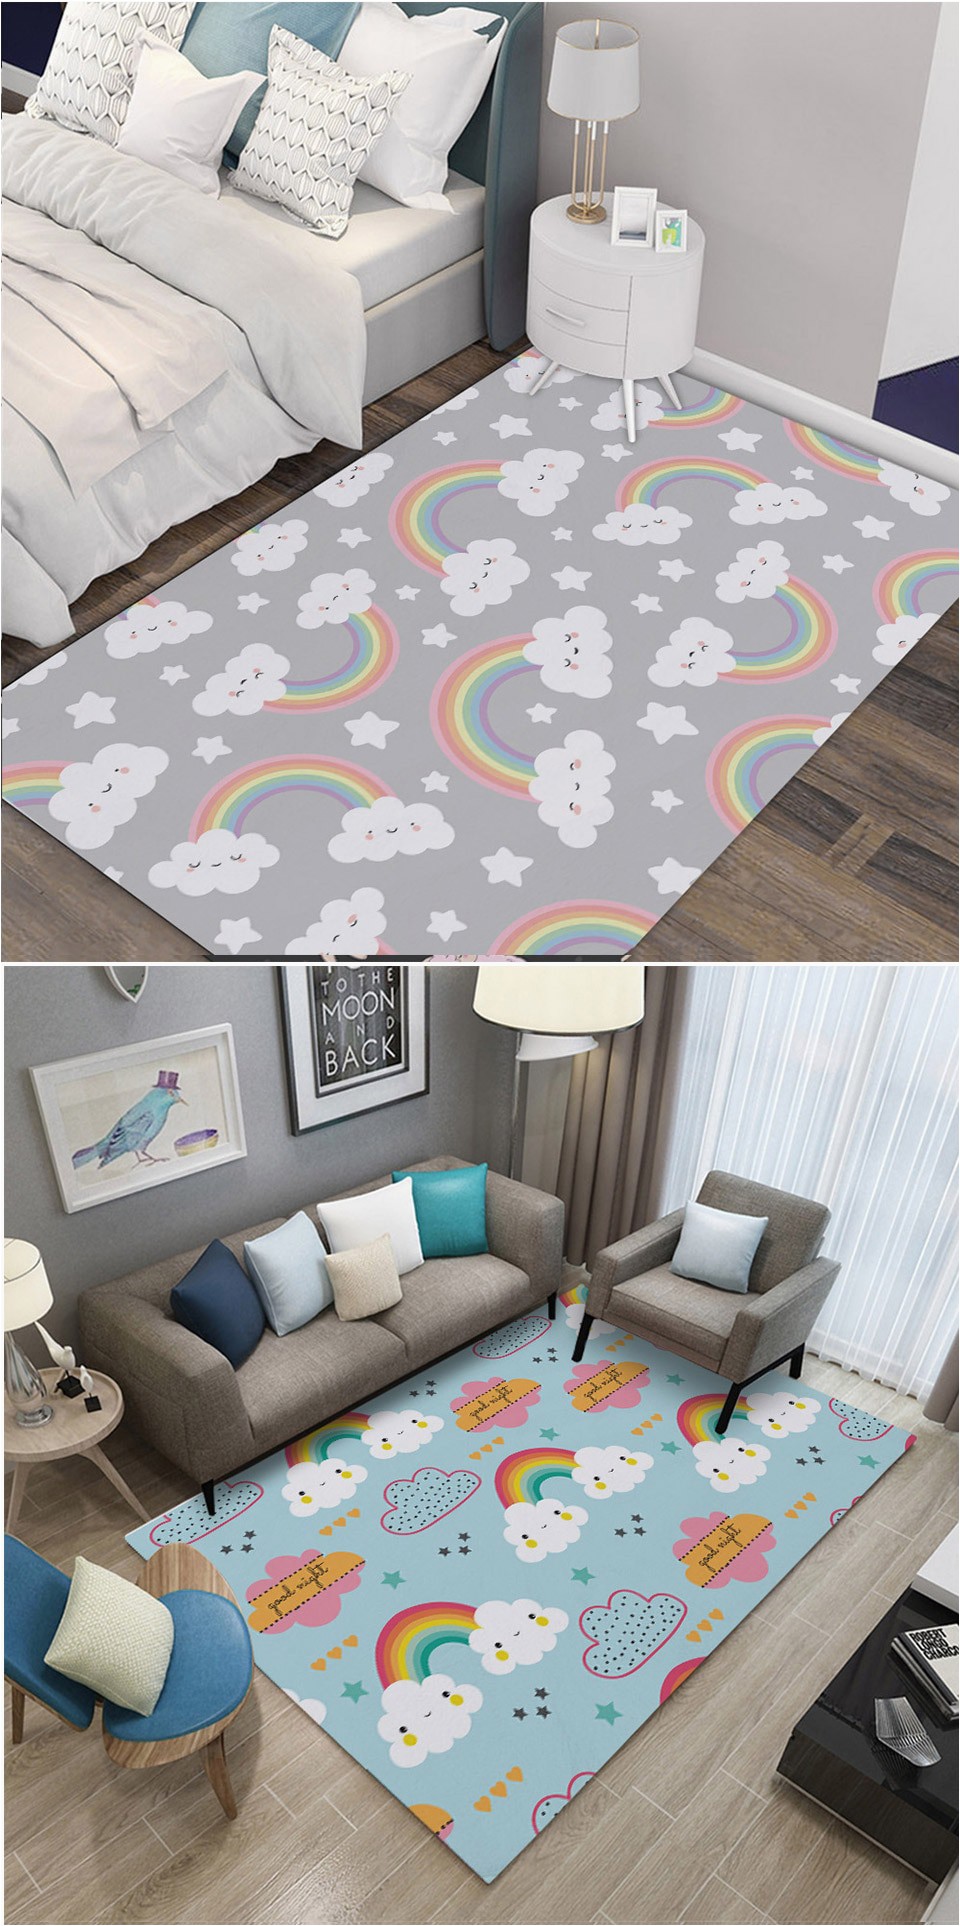 Area Rug On Carpet Slipping Us $23 39 Off Miracille Dream Clouds Floor Living Room Carpet Home Decoration Rugs for Child Non Slip area Rug Mat Stable Muti Place Carpet